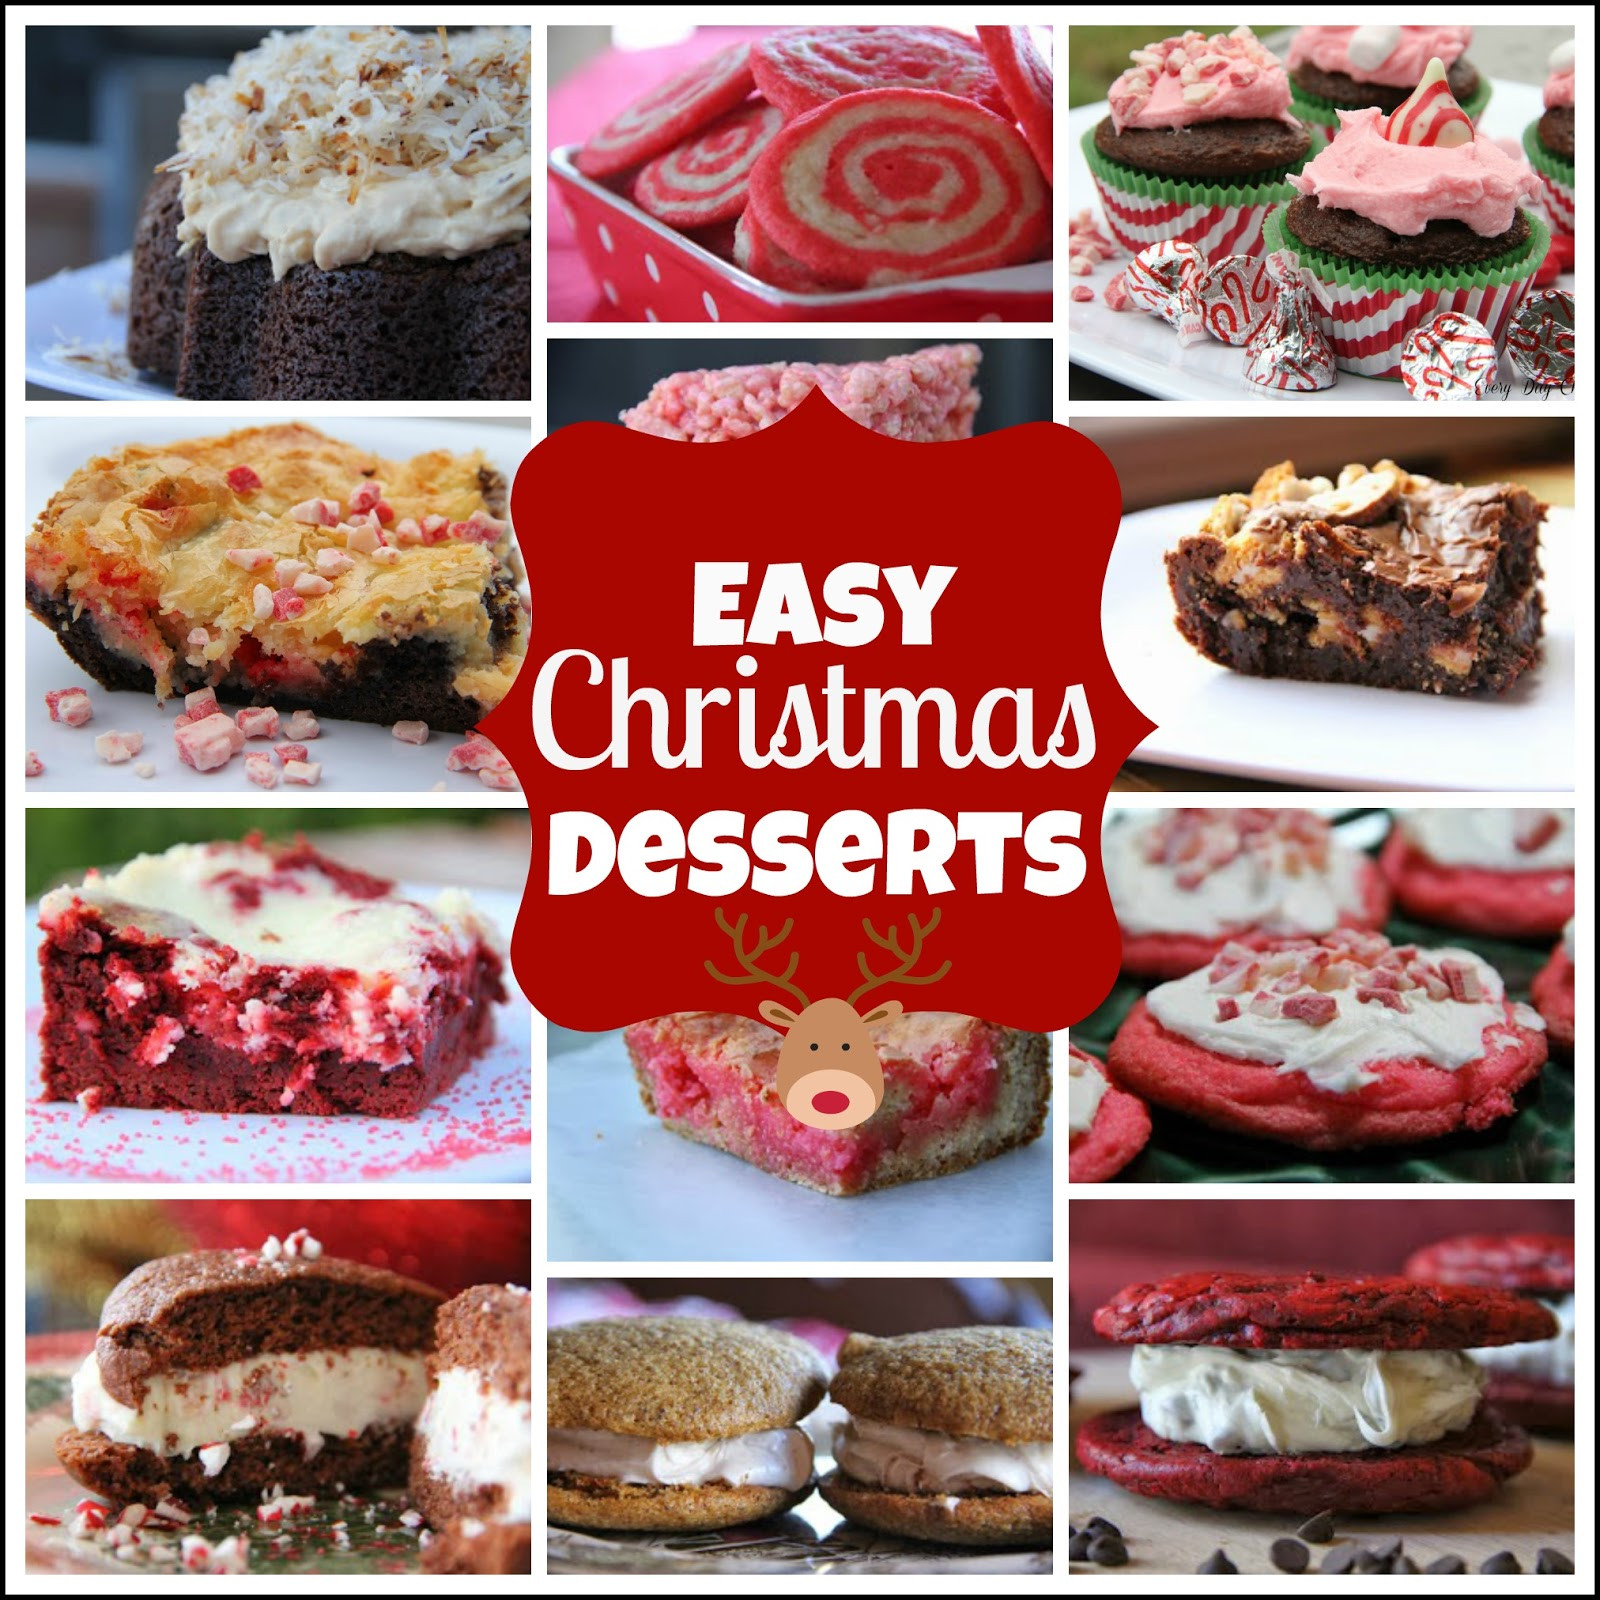 Simple Holiday Desserts
 Easy Christmas Desserts